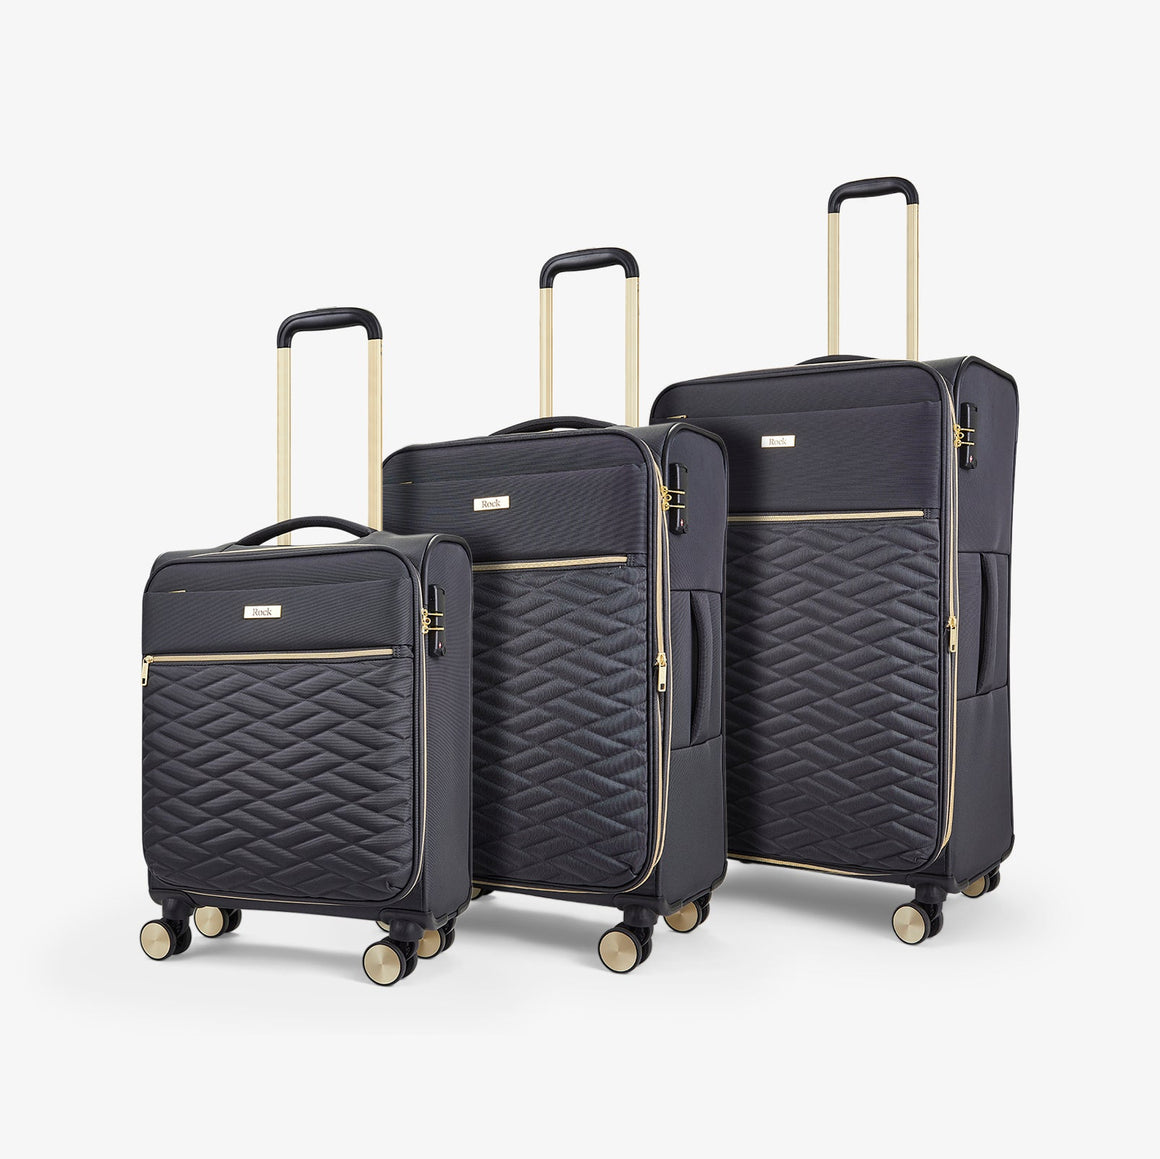 Sloane Set of 3 Suitcase in Charcoal